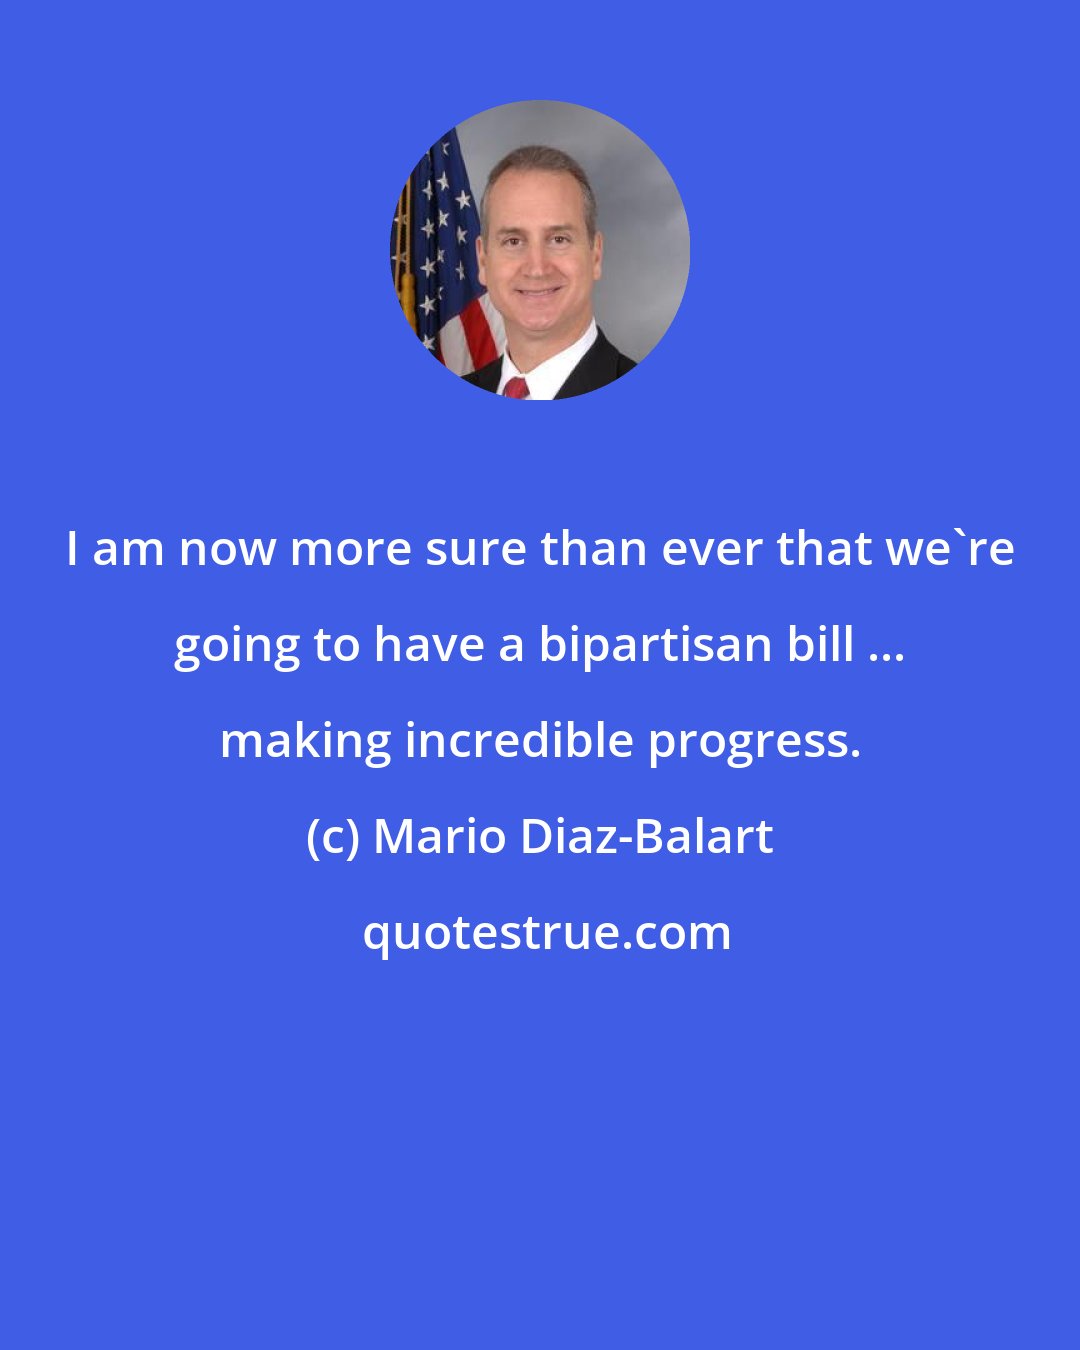 Mario Diaz-Balart: I am now more sure than ever that we're going to have a bipartisan bill ... making incredible progress.